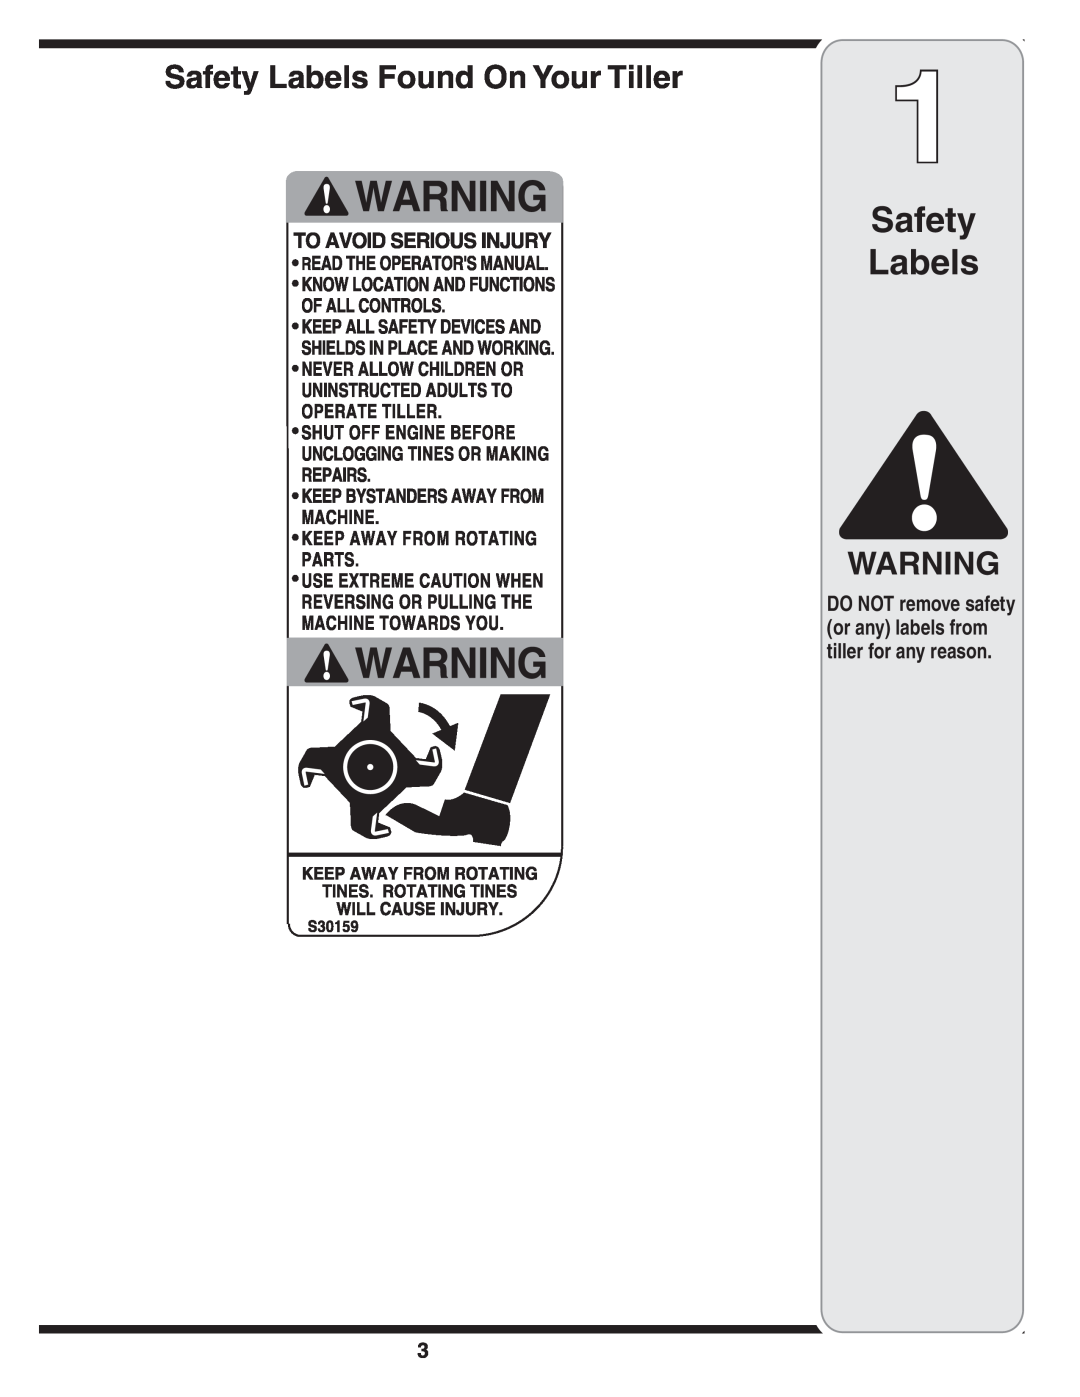 MTD 390 Series Safety Labels Found On Your Tiller, DO NOT remove safety or any labels from tiller for any reason 